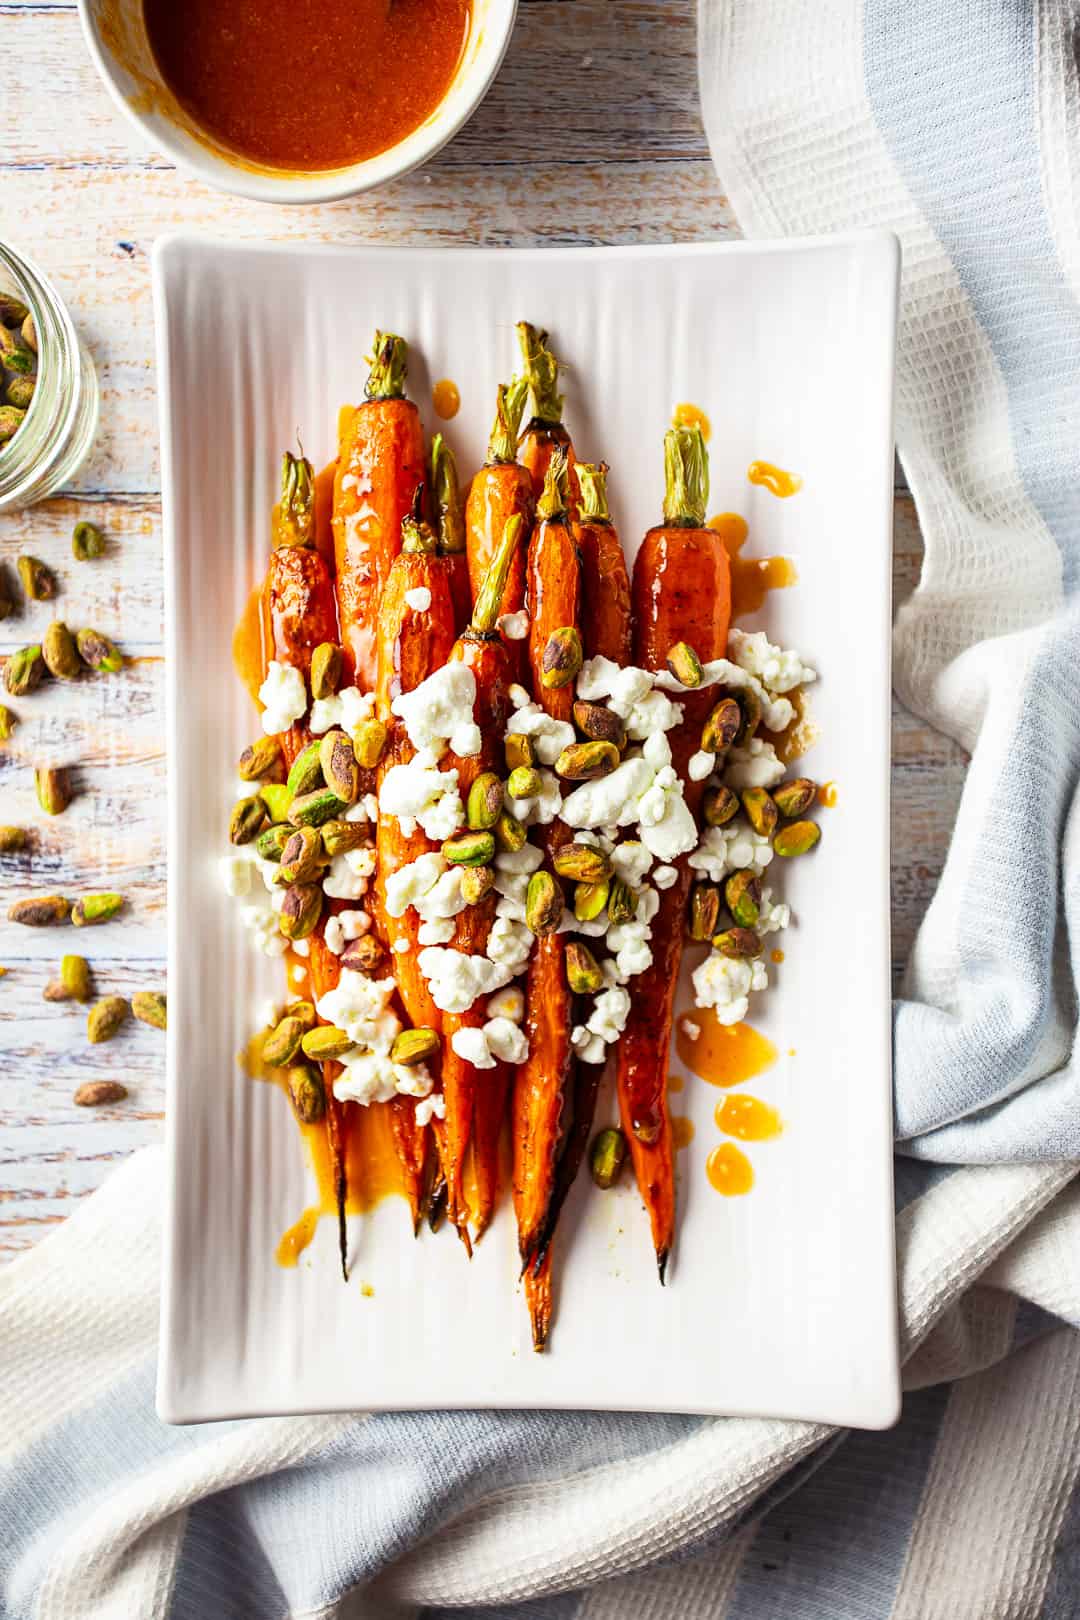 Glazed carrot recipes with orange, goat cheese, and nuts.